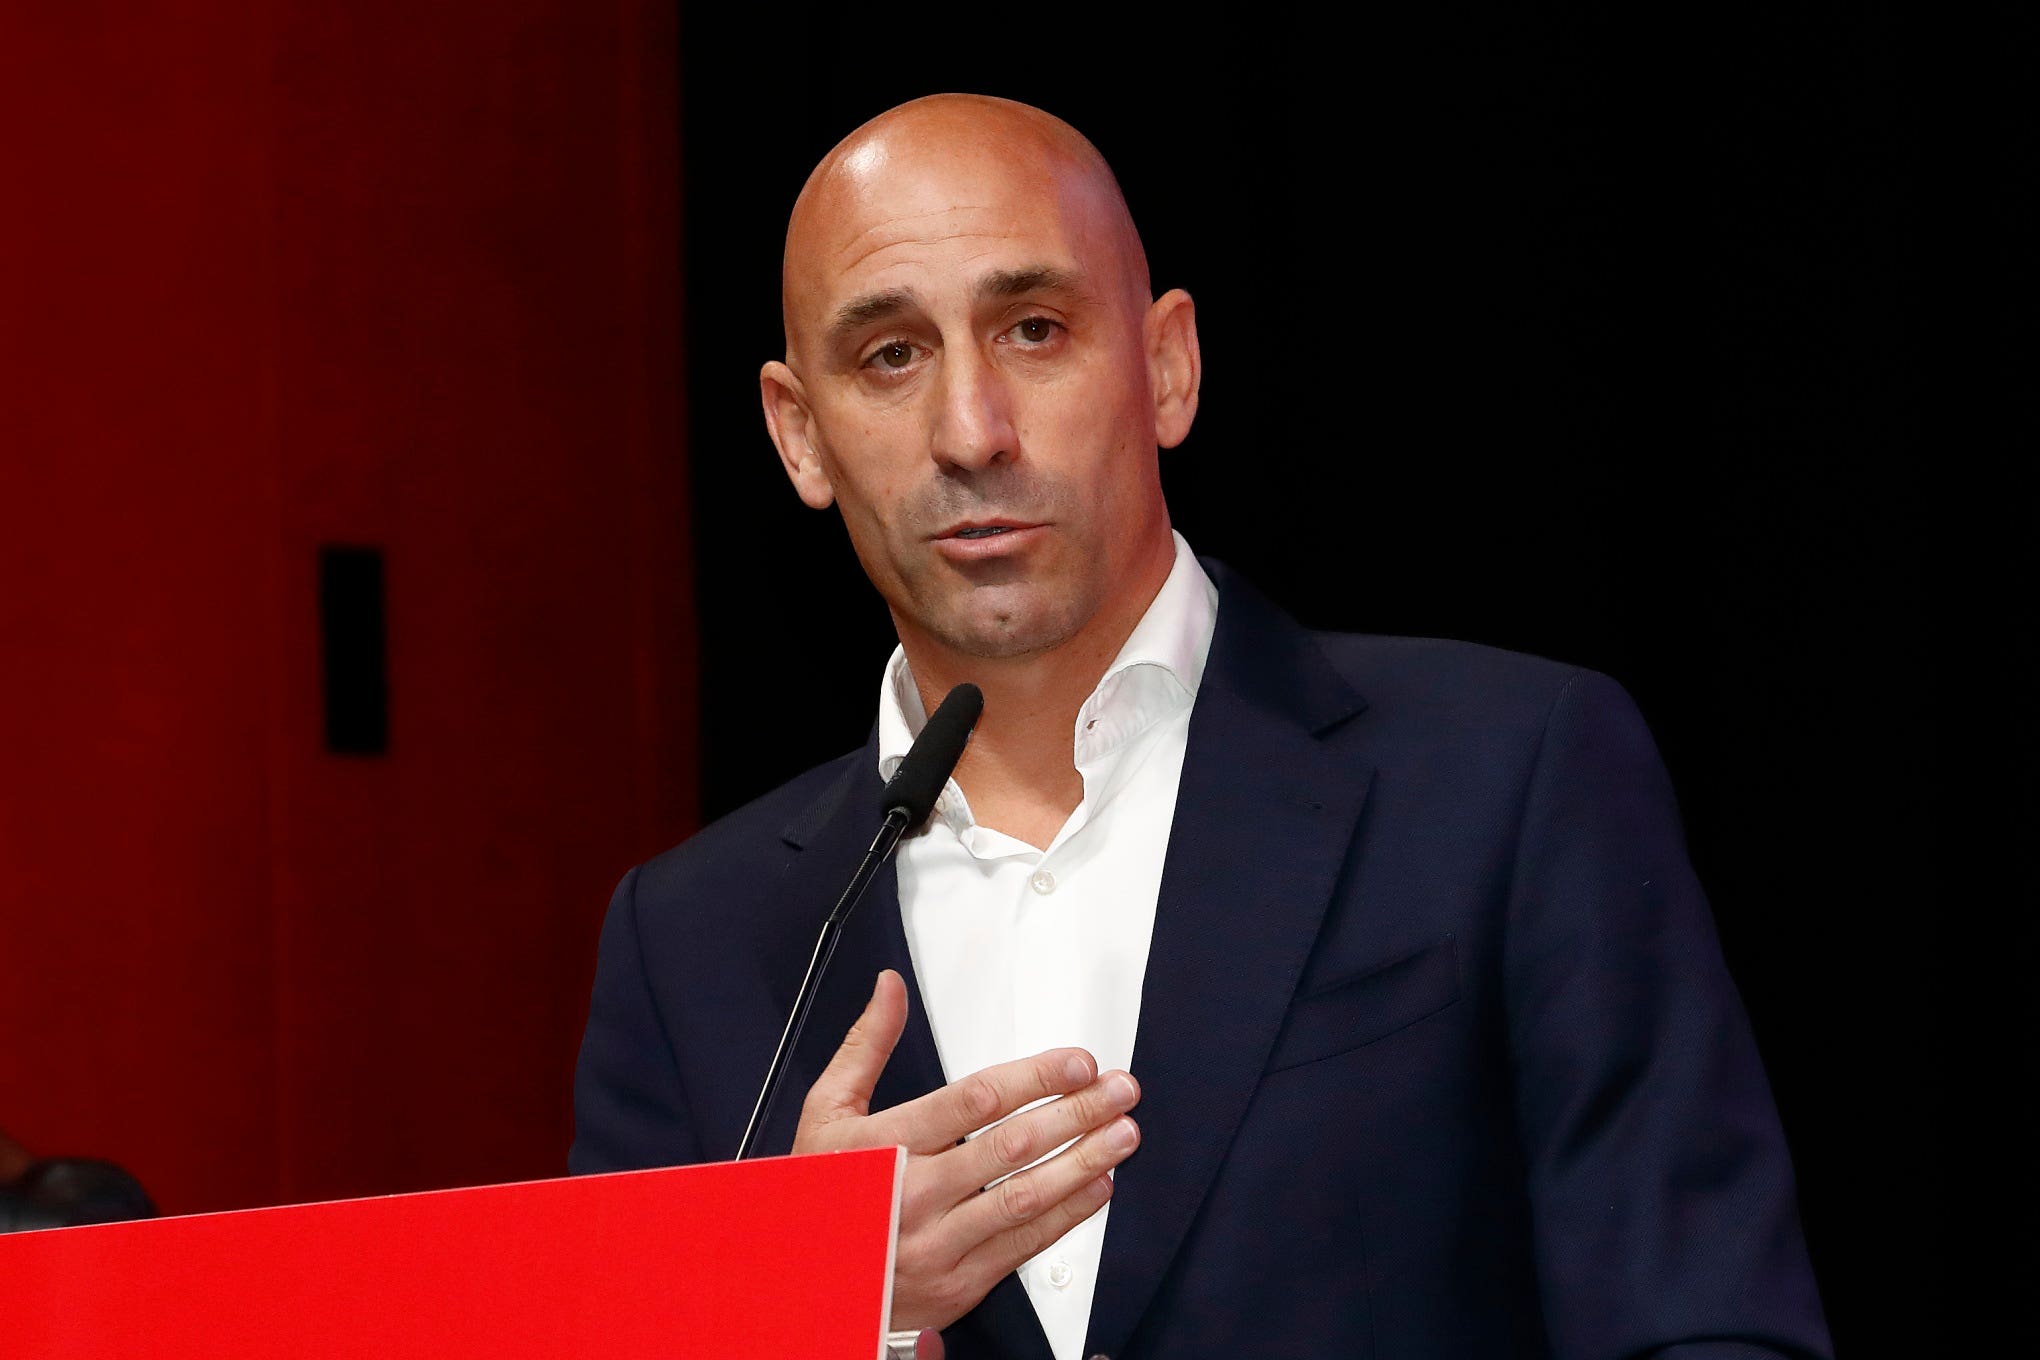 One week after sullying the Women’s World Cup, Luis Rubiales is now a ...